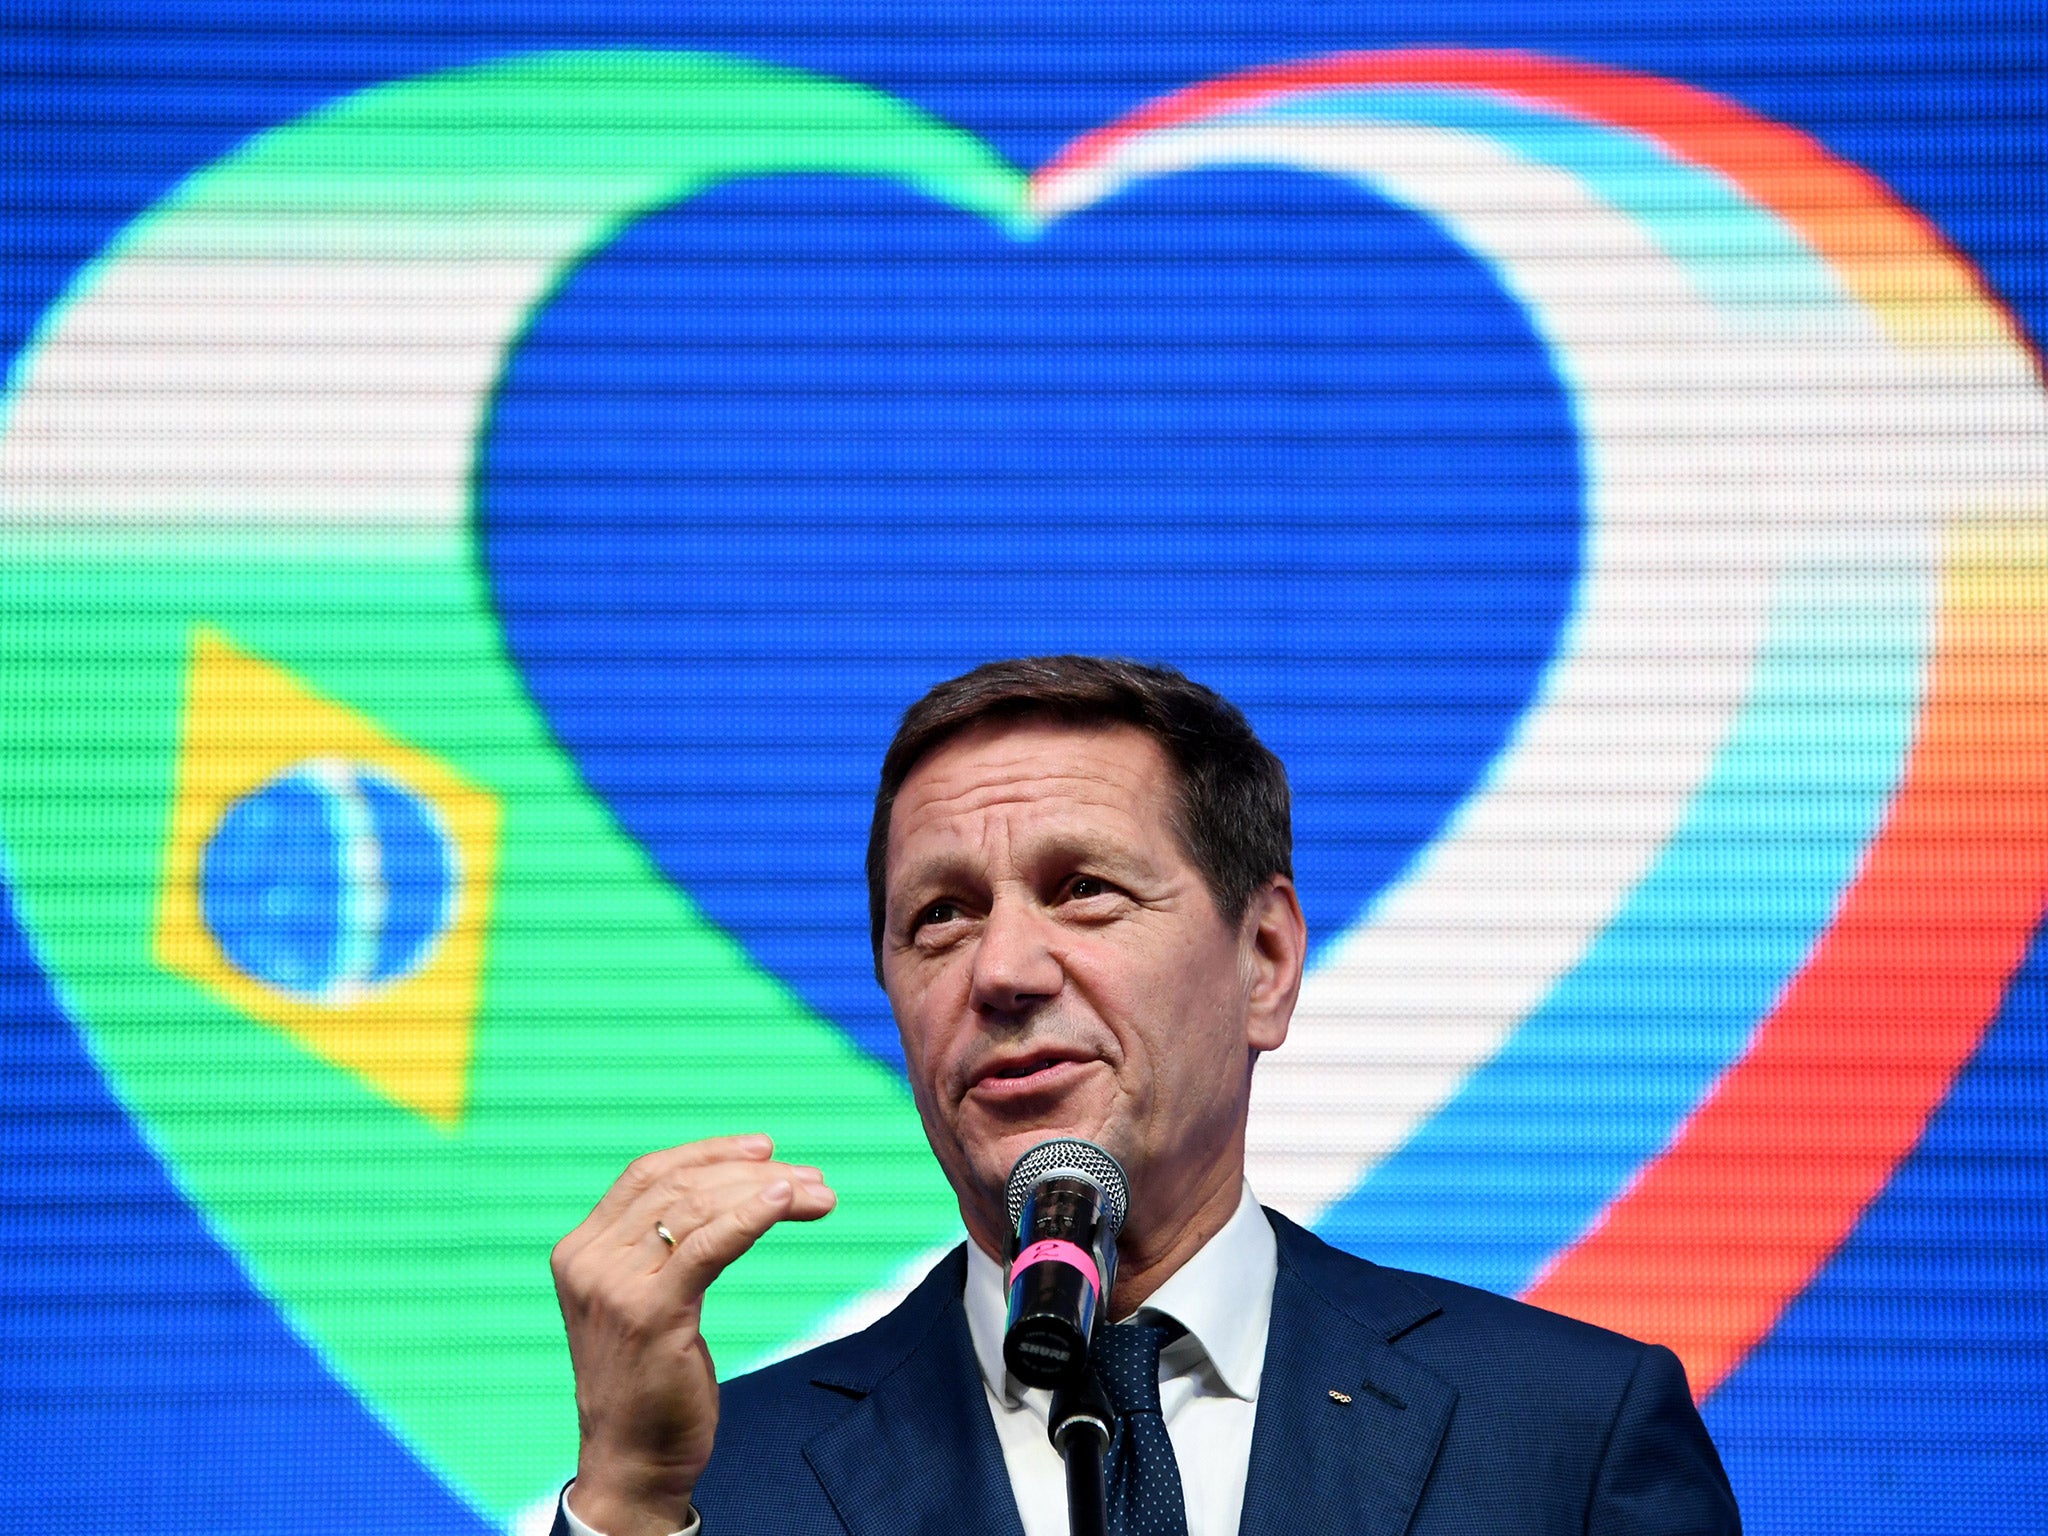 Russian Olympic Committee head Alexander Zhukov claimed Russia have been harshly treated ahead of the Olympics